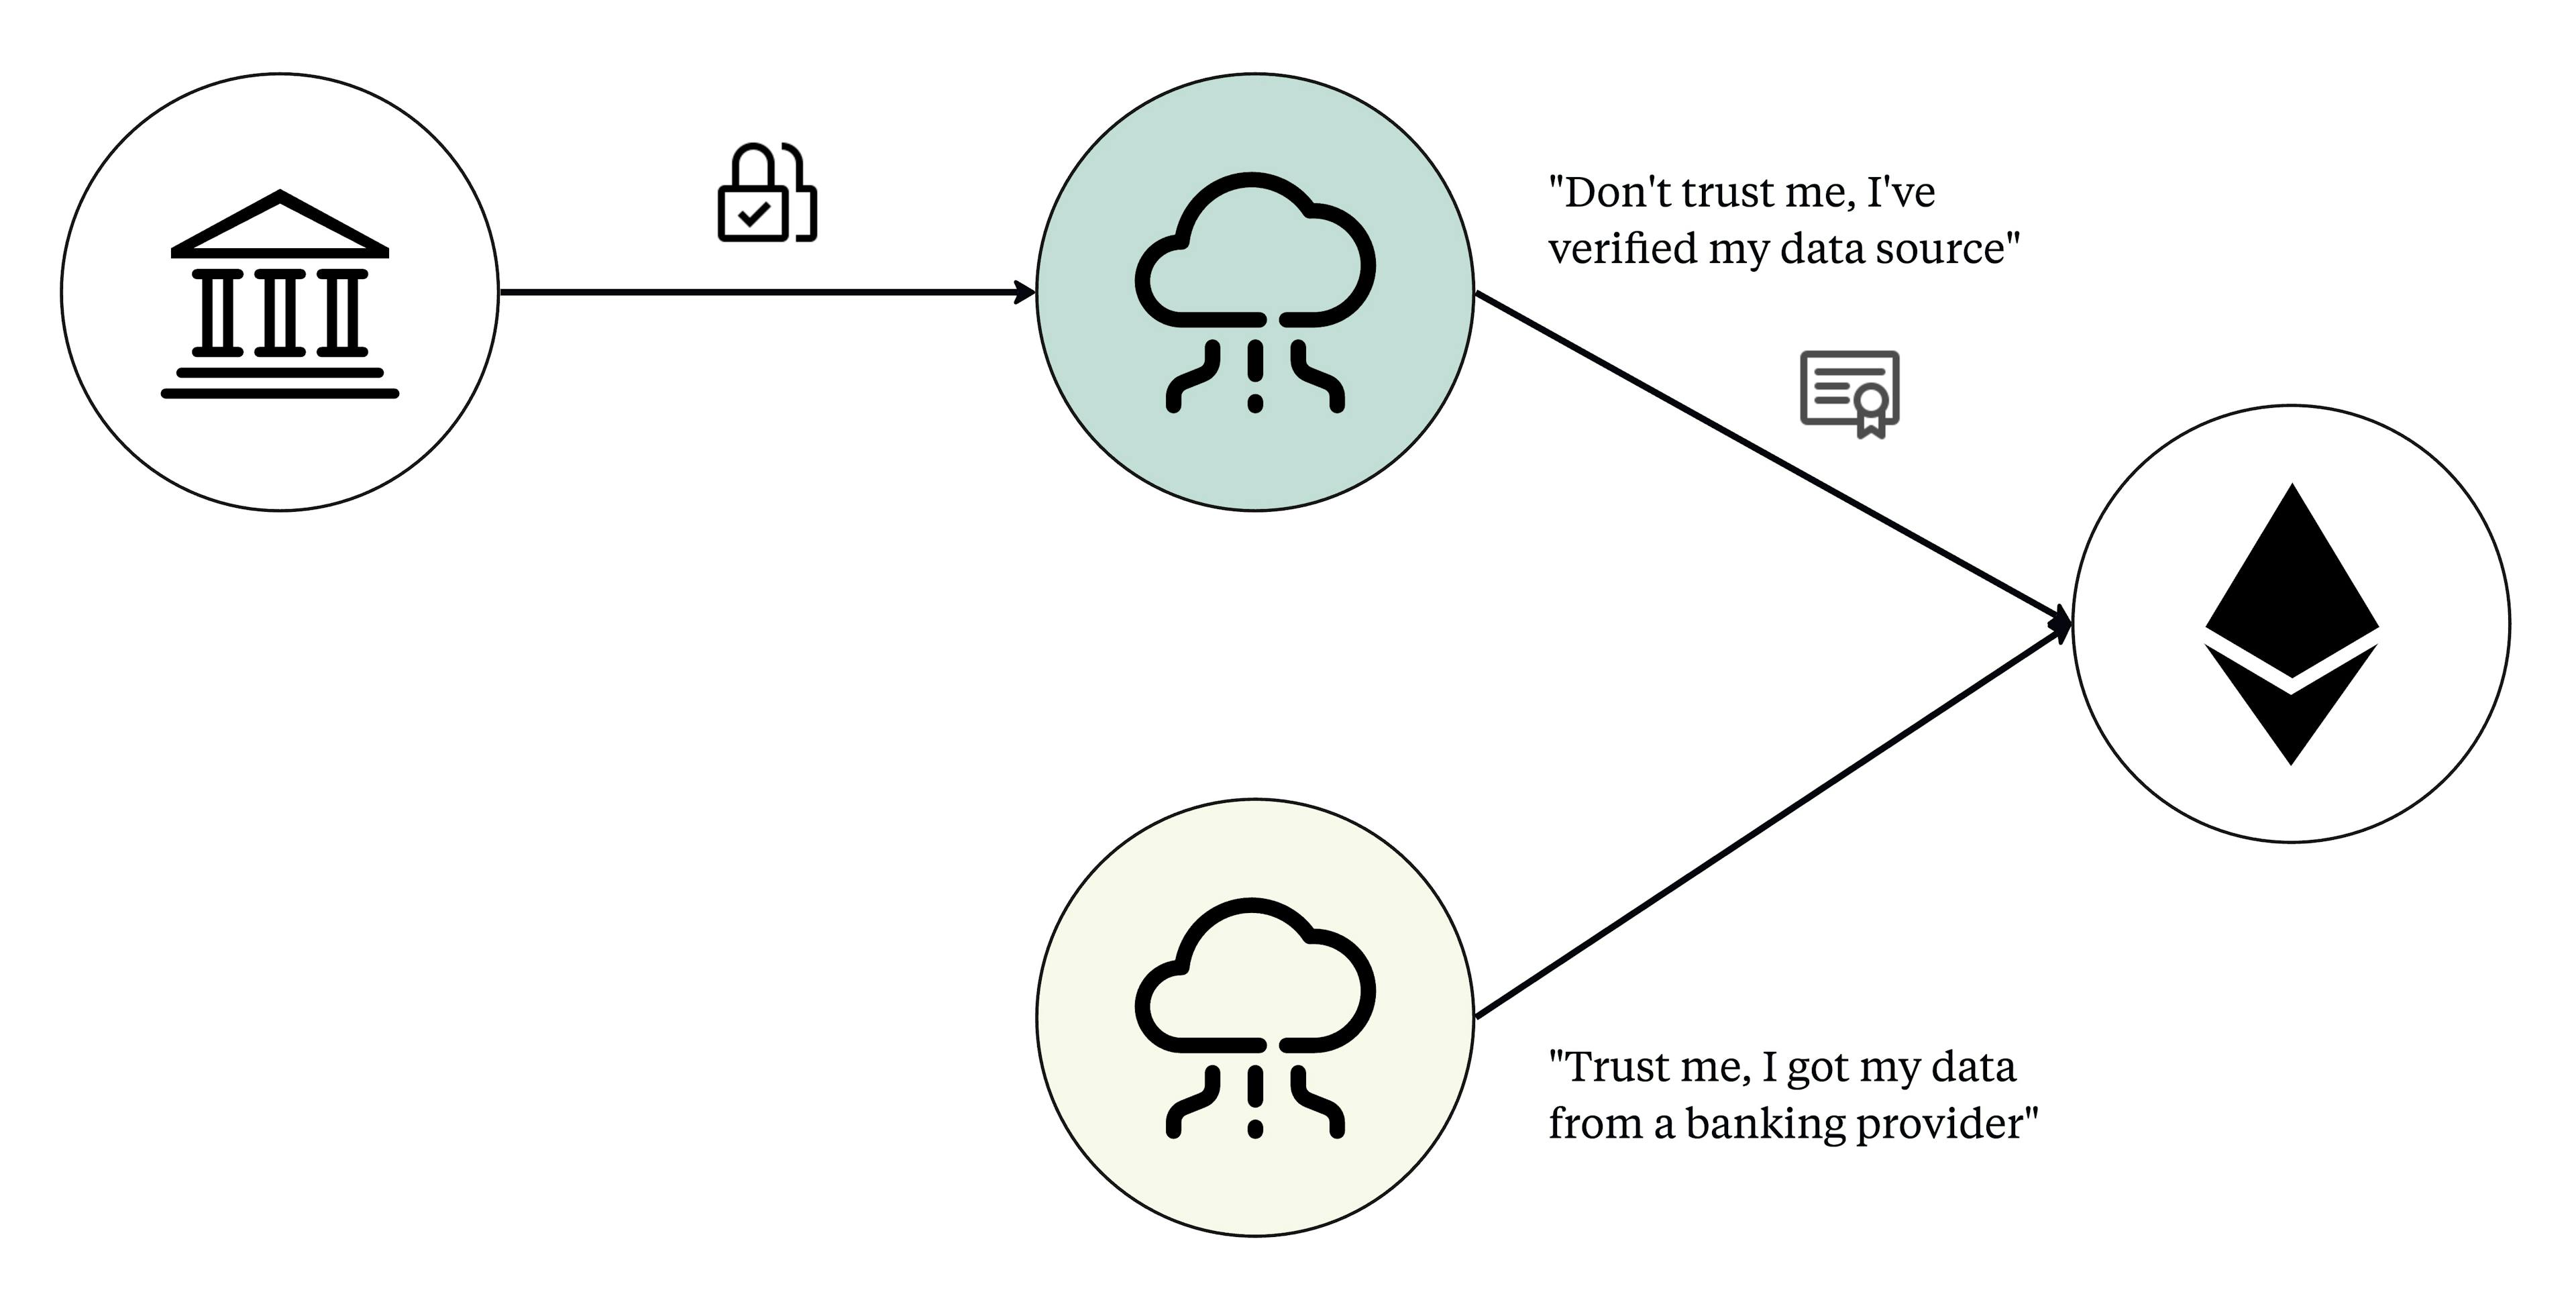 Data flow comparison between a transparent data provider and one that is not. Who would you trust more?